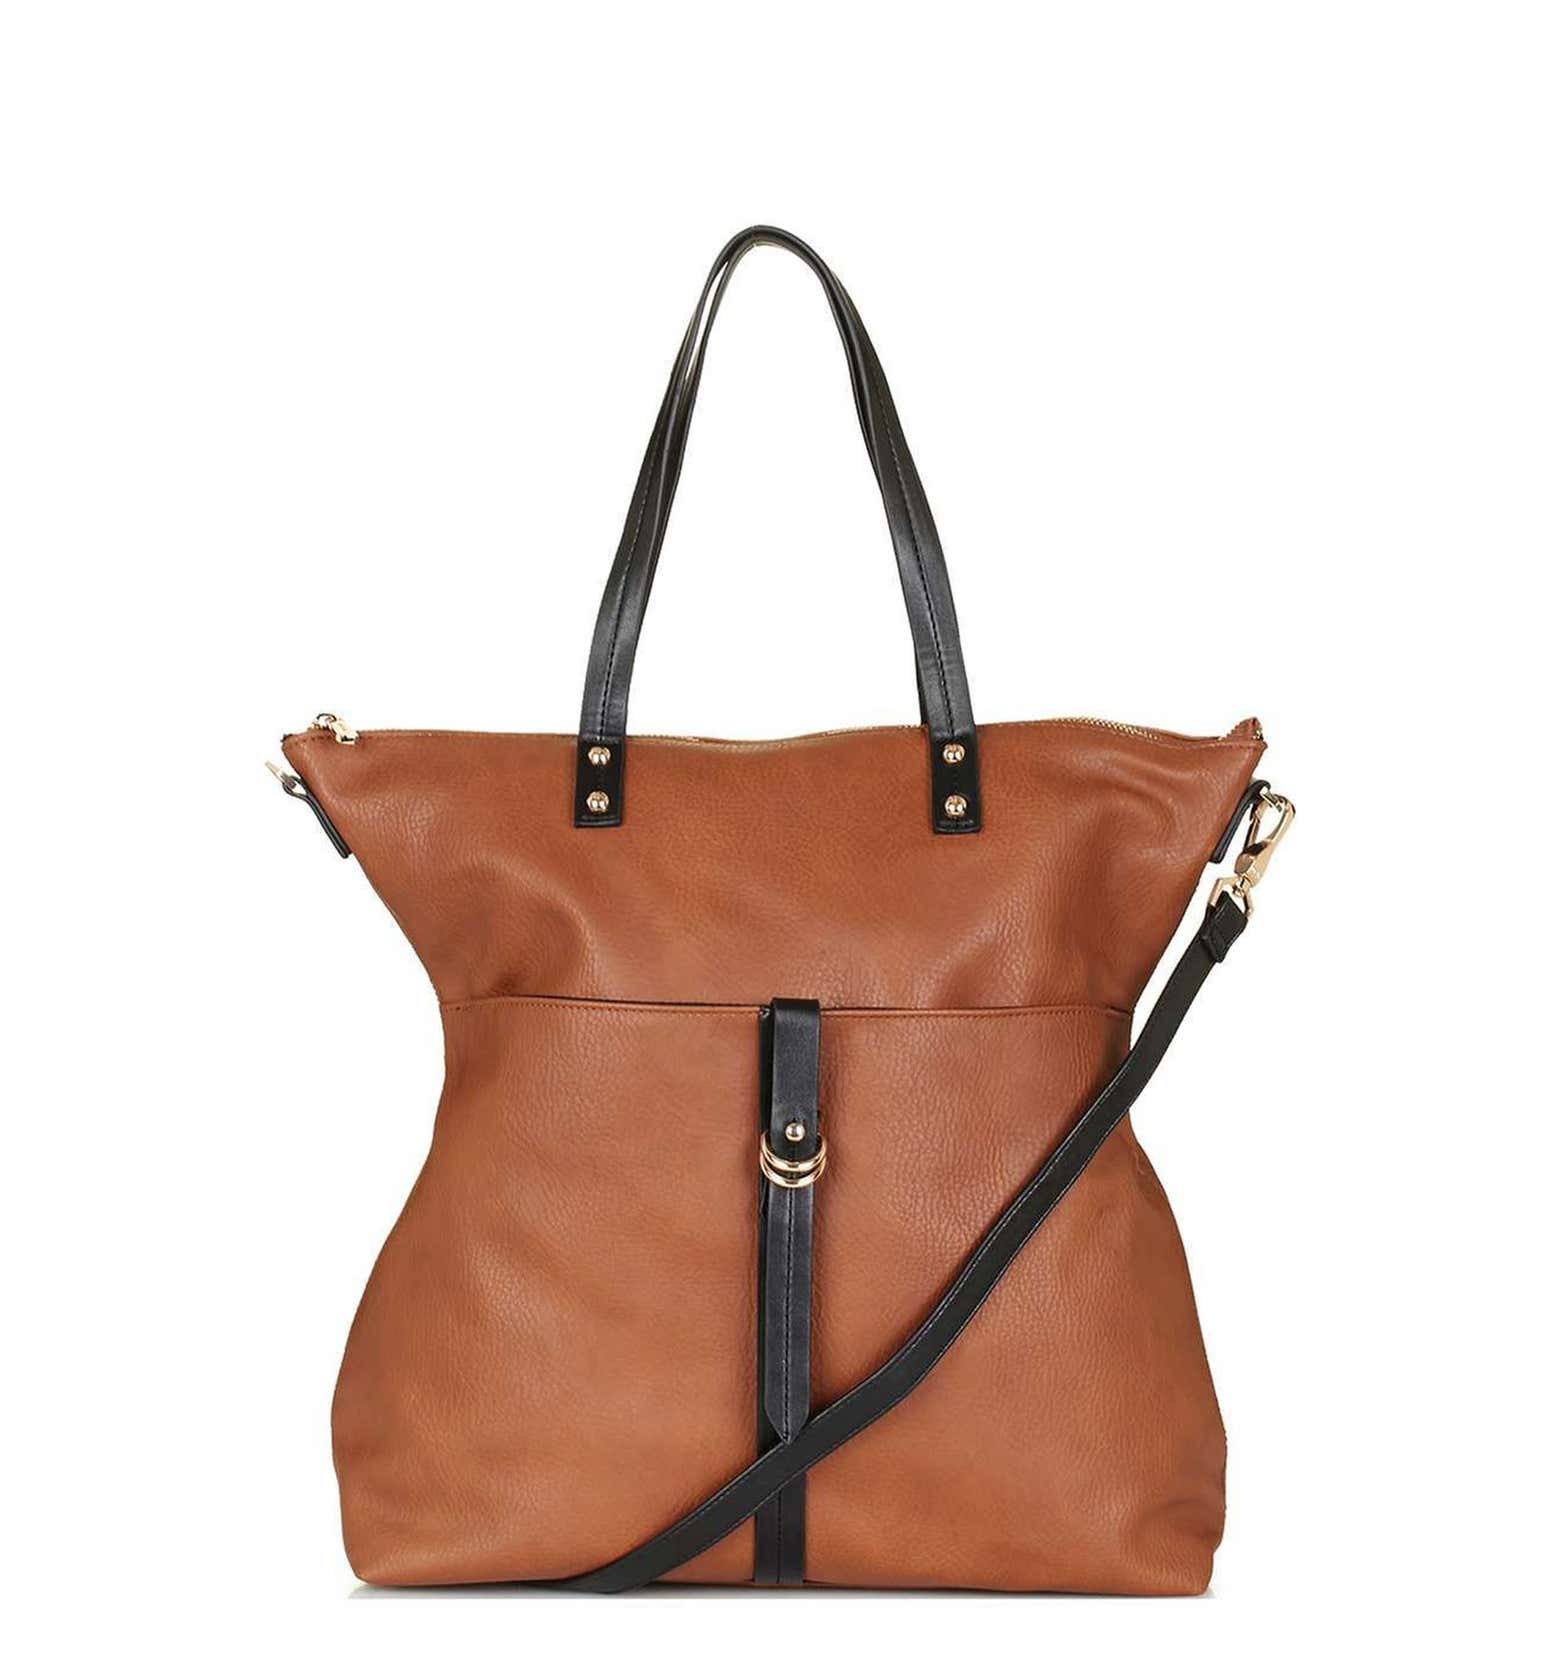 Topshop Rushton Faux Leather Tote | Nordstrom